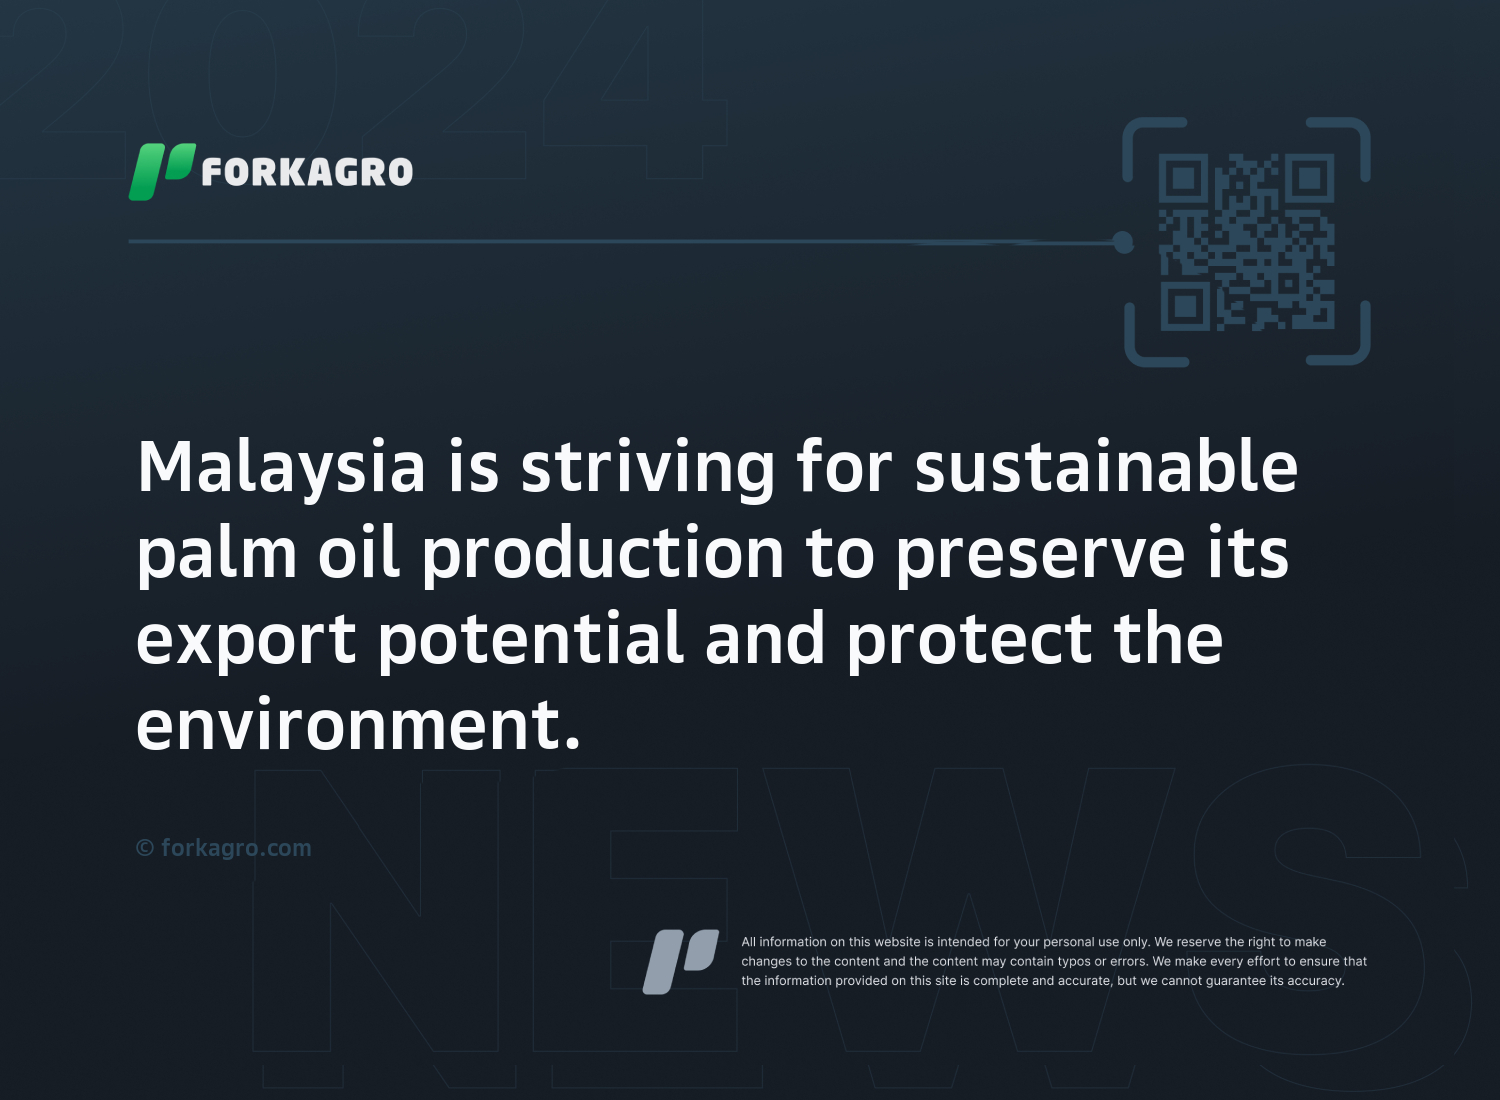 Malaysia is striving for sustainable palm oil production to preserve its export potential and protect the environment.